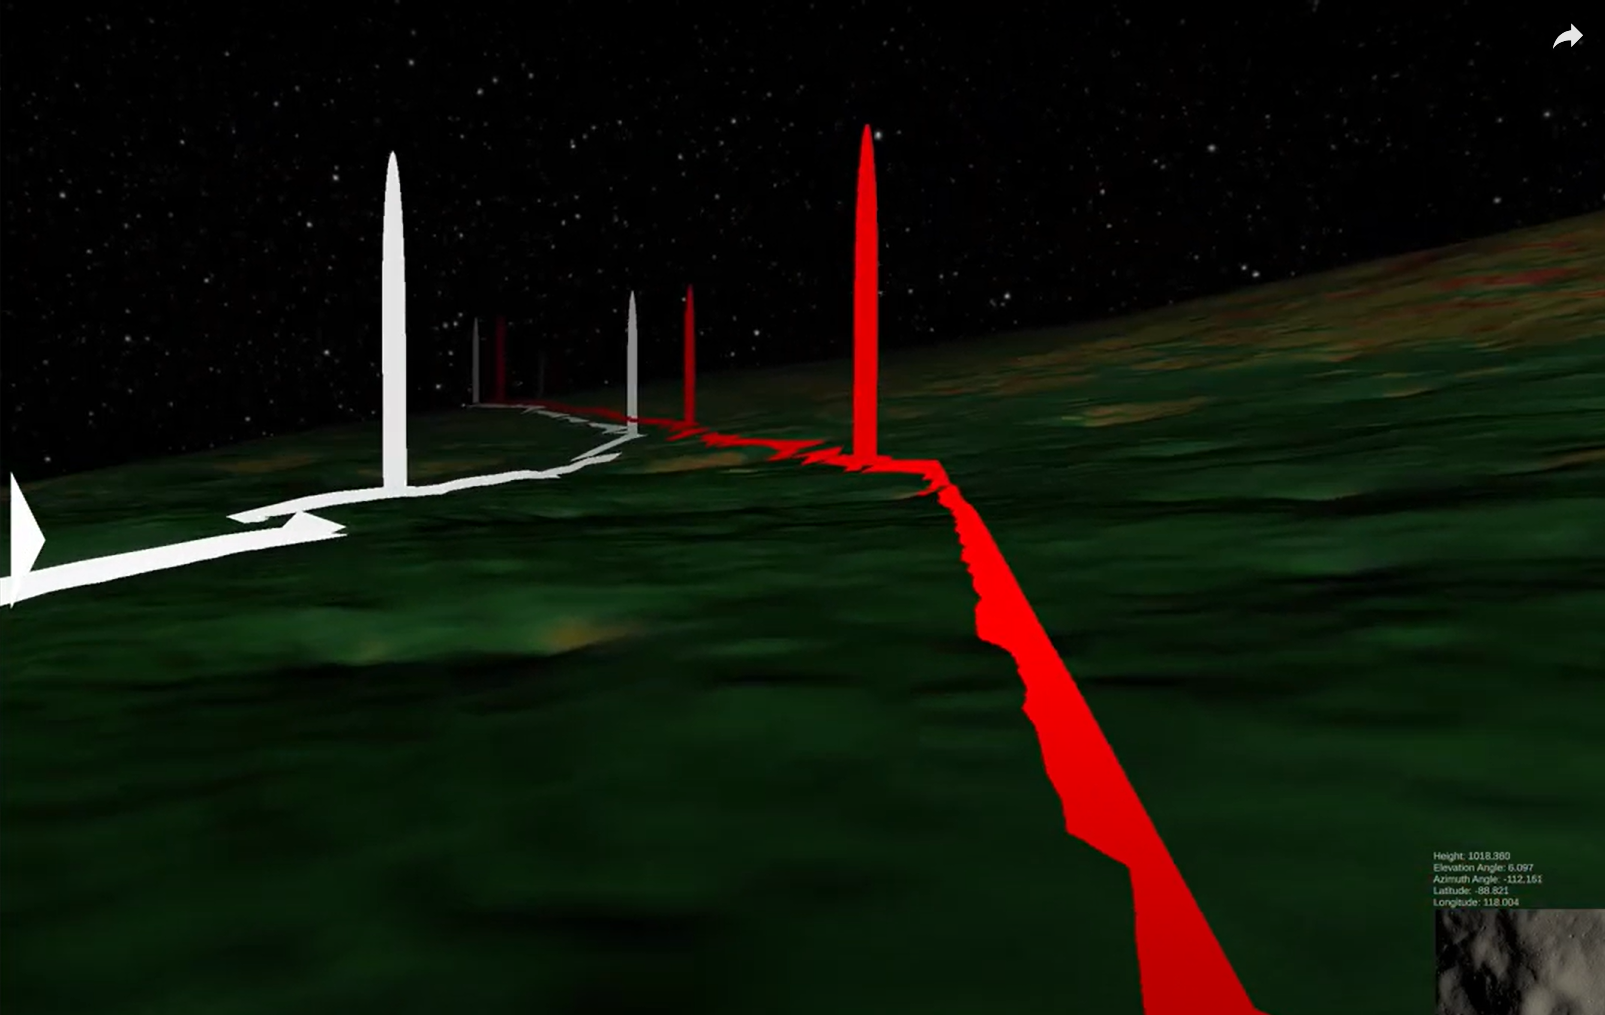 A screenshot of an applications submitted to the ADC by a group of students. It displays two lines on a rendered surface, one white, and one red. Both expand out into the distance, with 3 large spikes at various points.